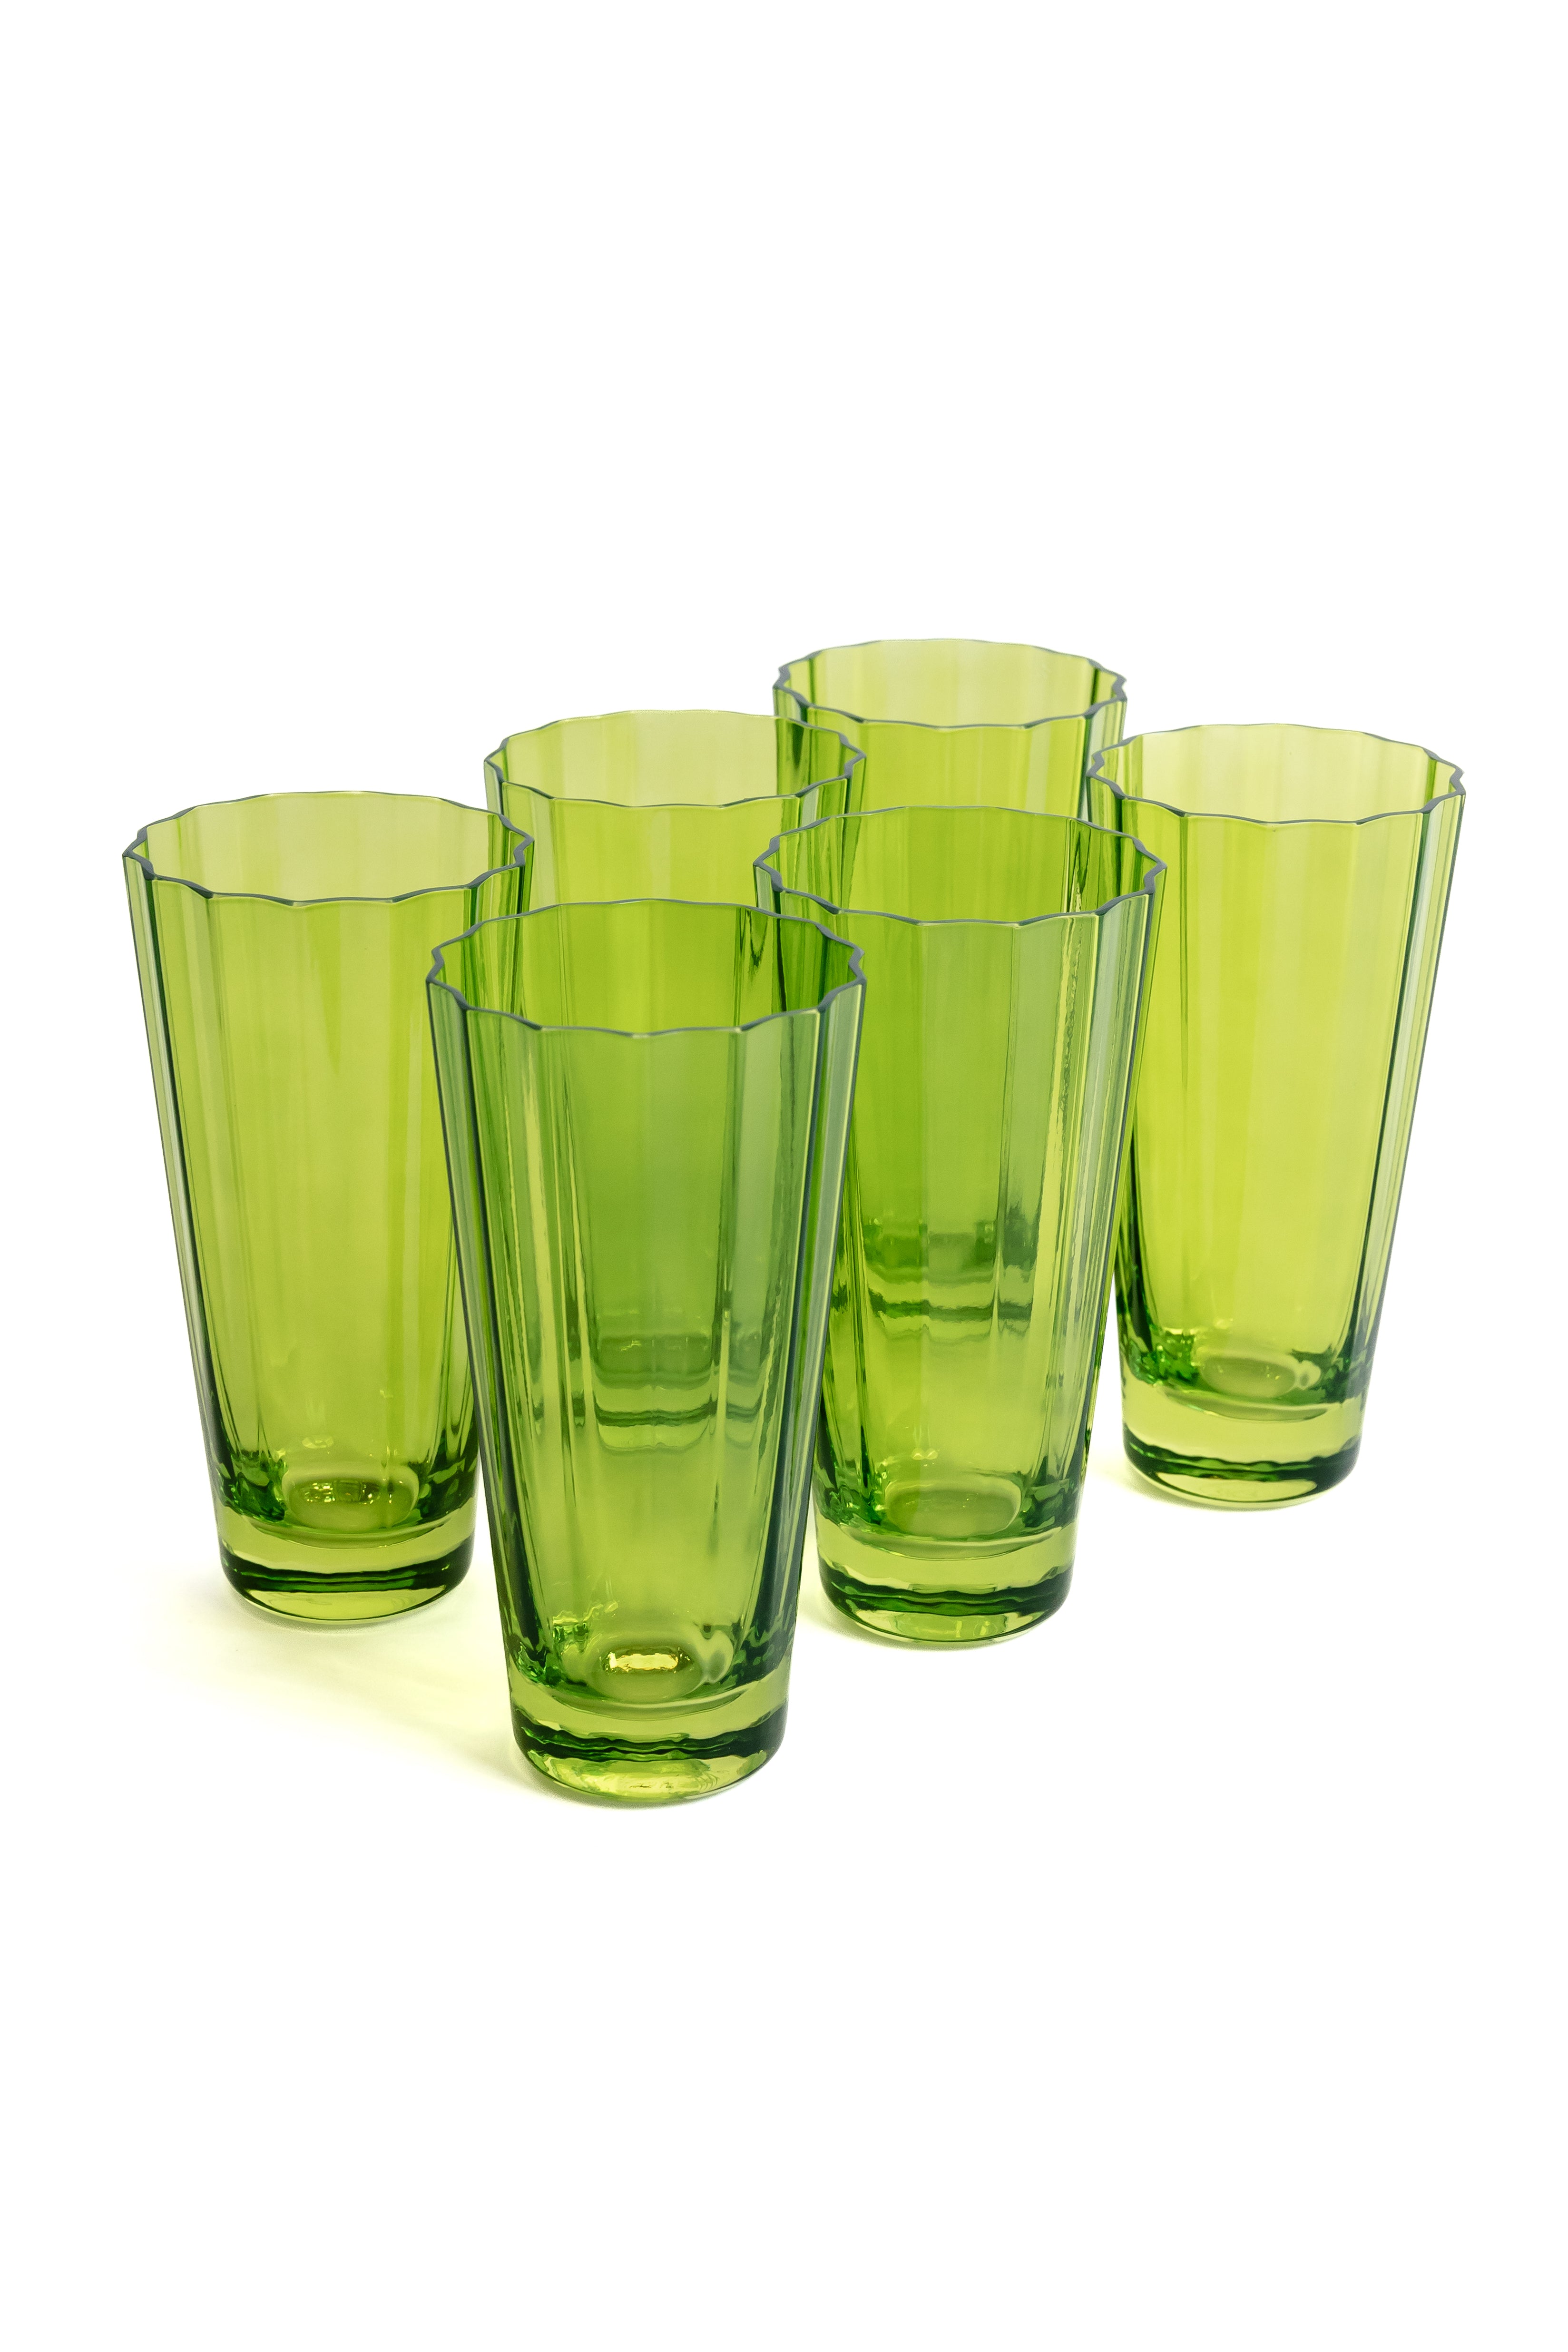 Estelle Colored Sunday High Balls - Set of 6 {Forest Green}